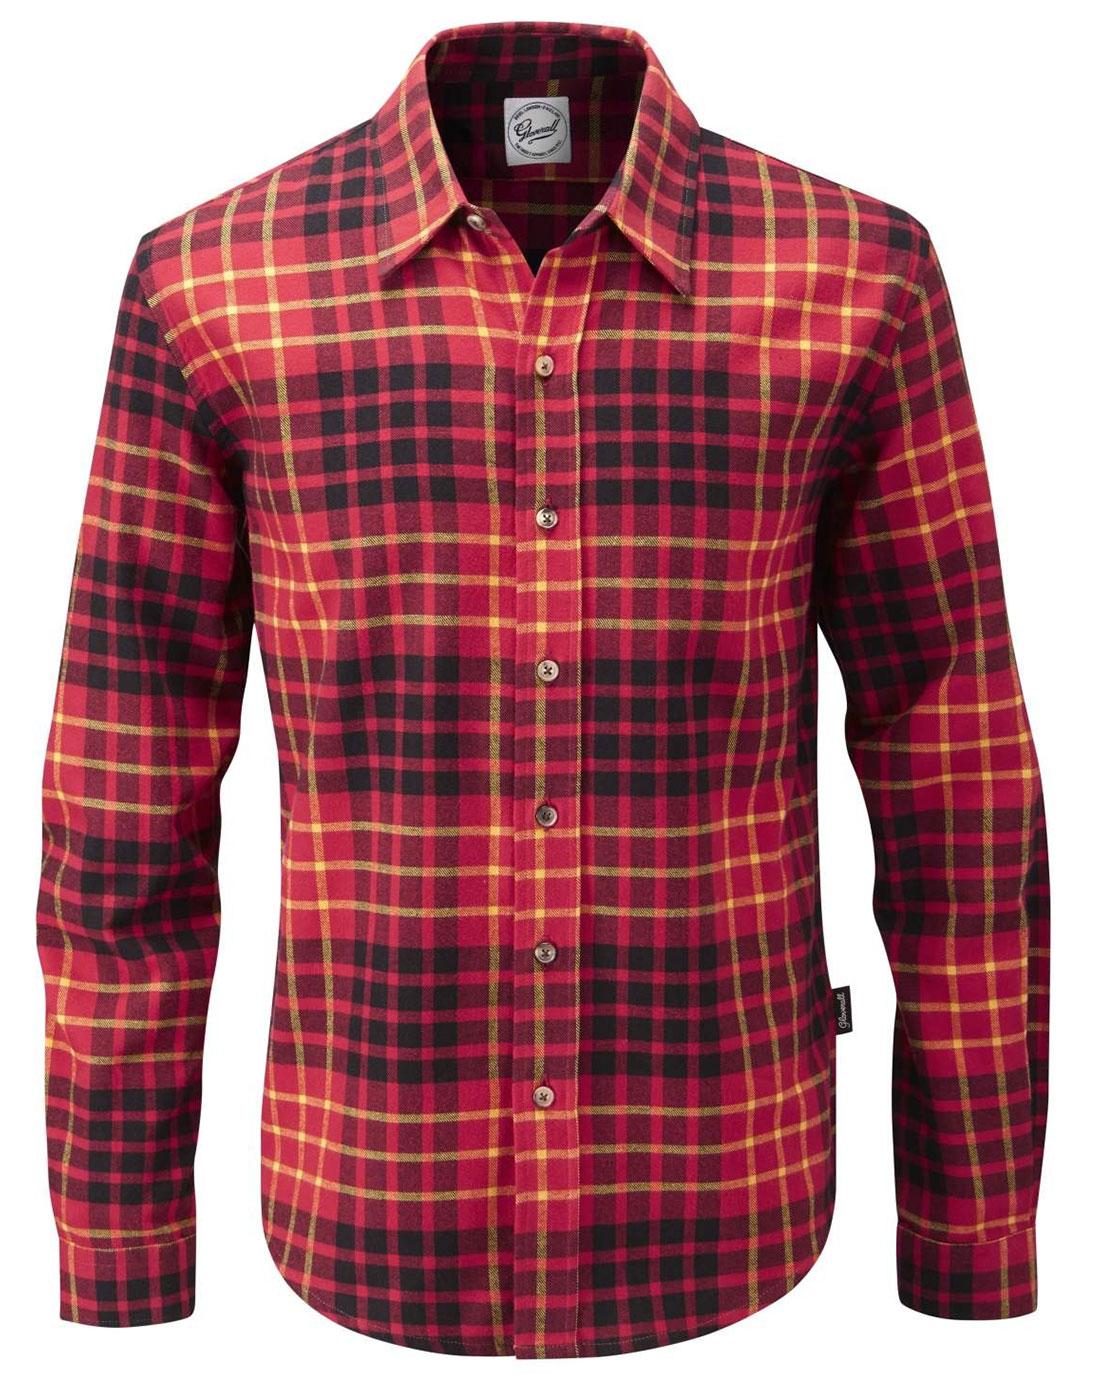 GLOVERALL Retro Classic Check Brushed Cotton Shirt